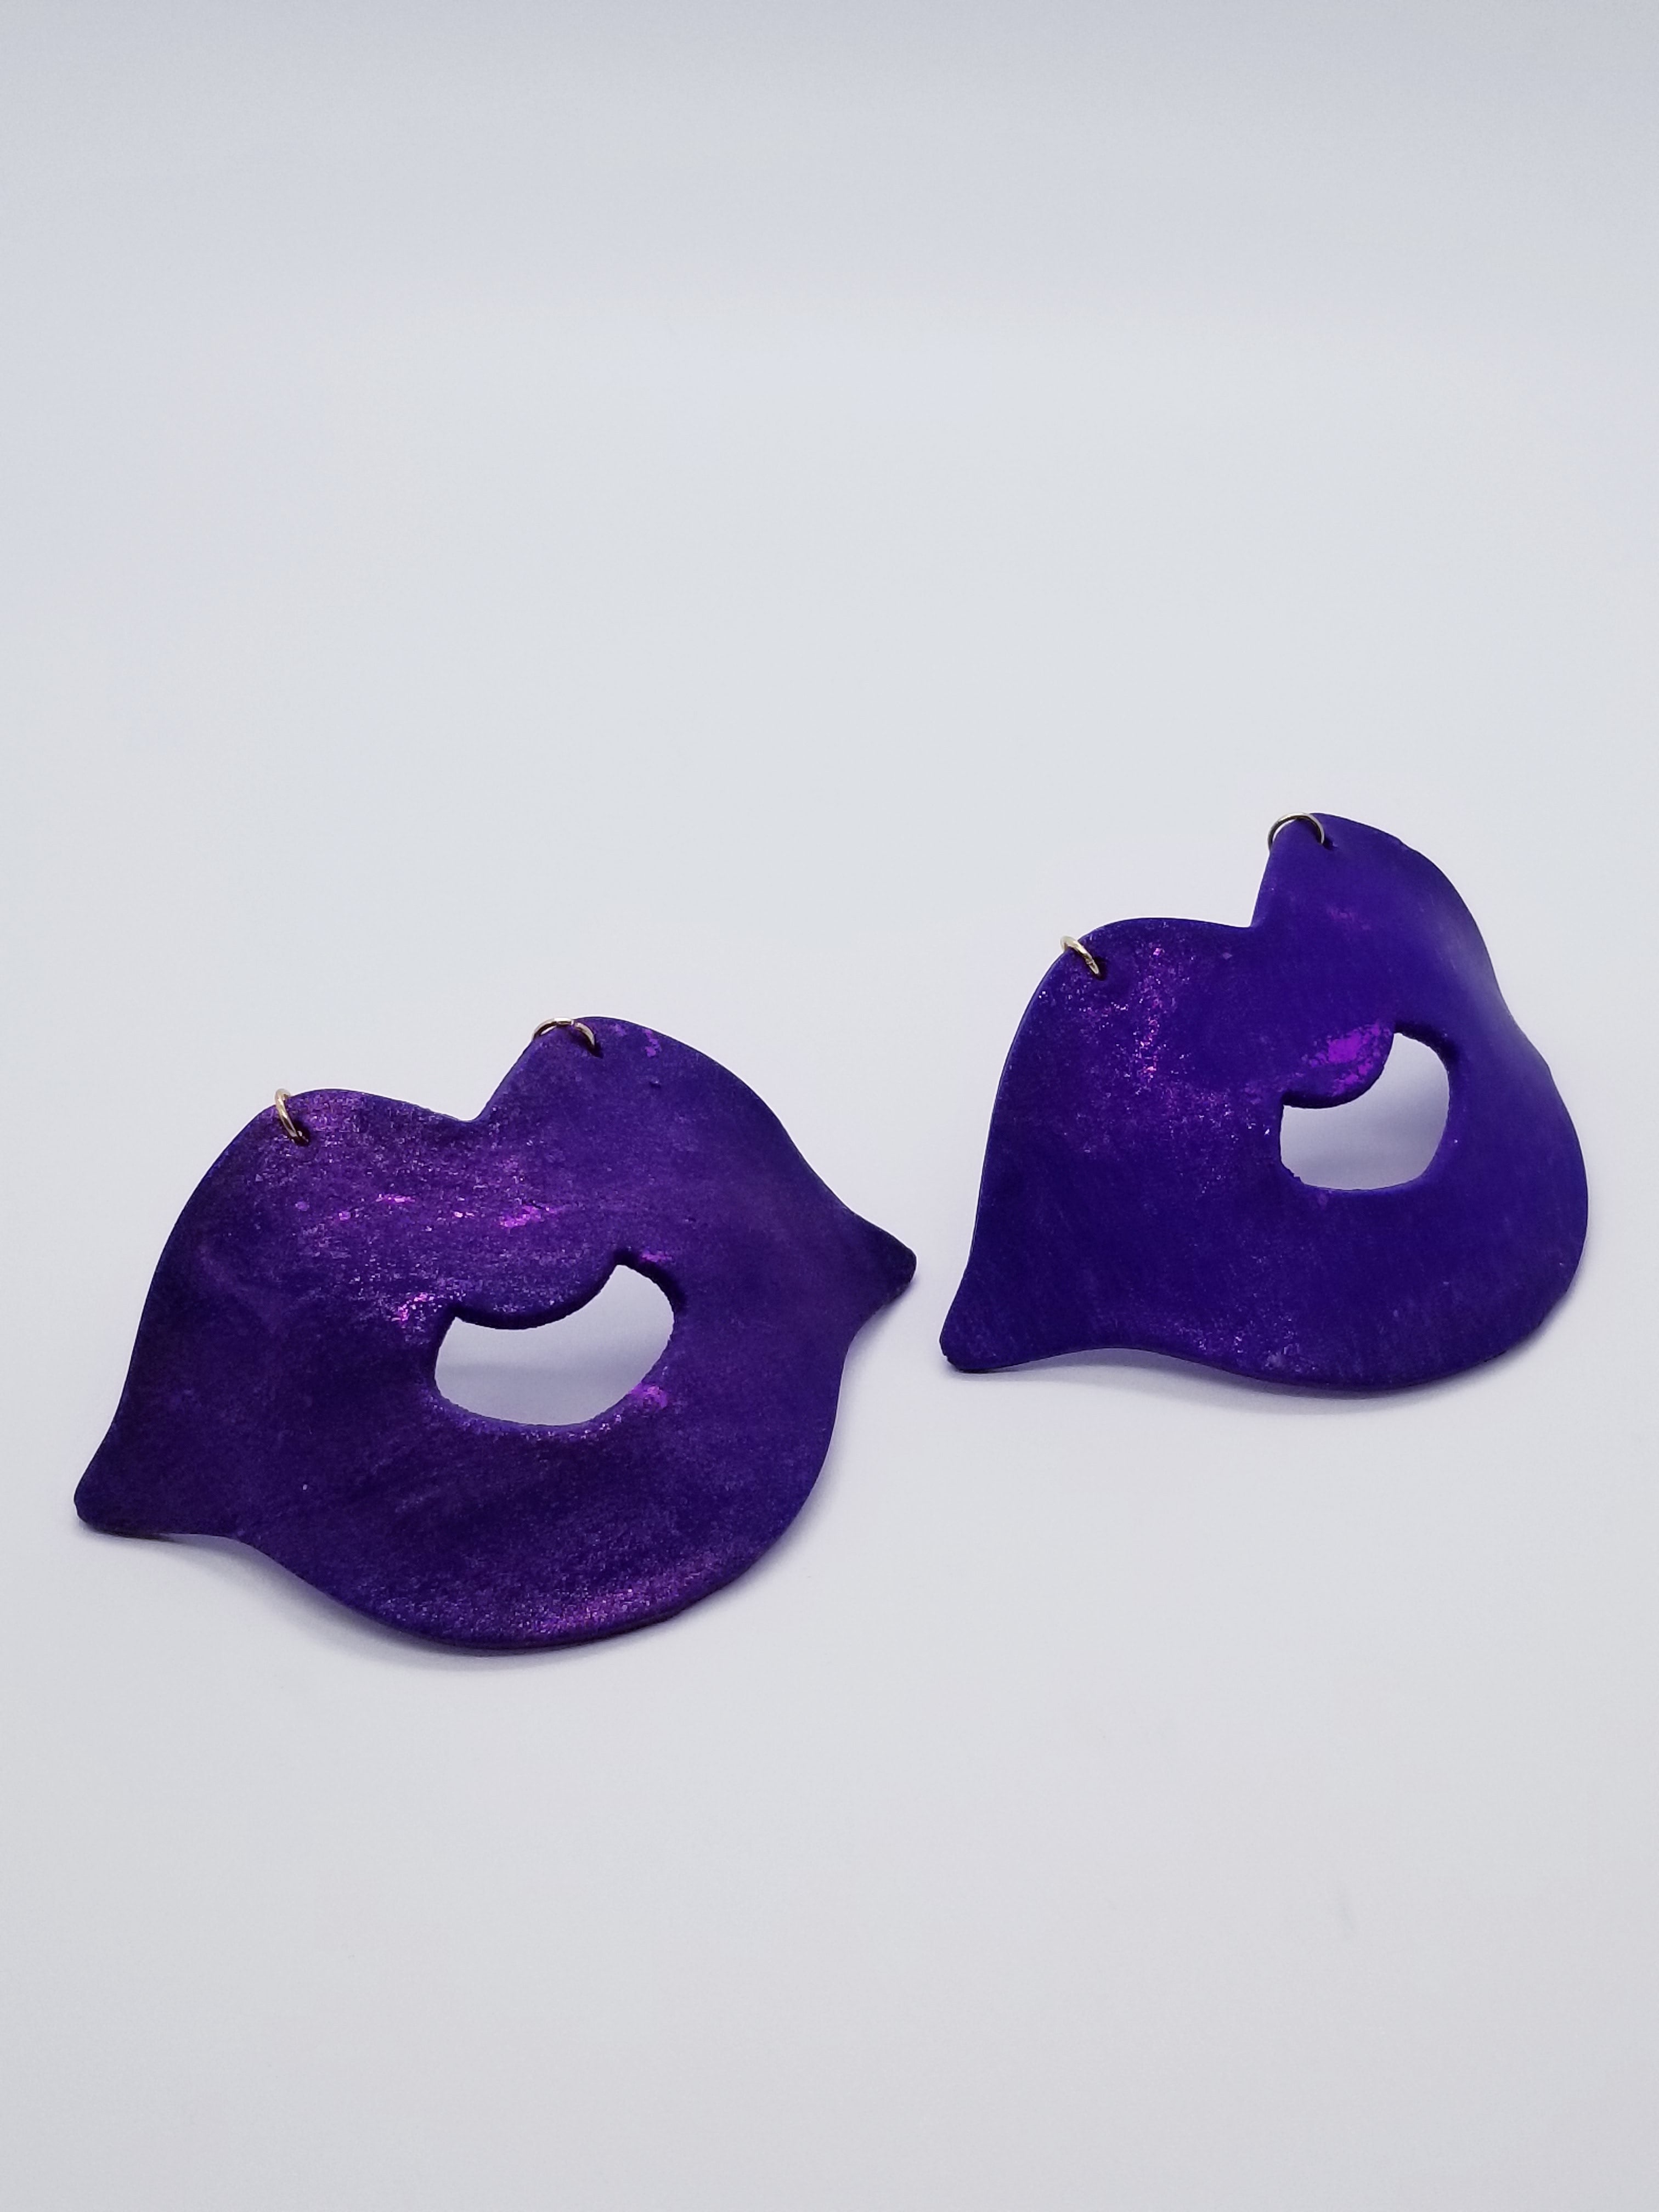 Length: 4 inches | Weight: 0.8 ounces   Designed just for you! The earrings are handmade using purple polymer clay lip shaped design, gold chains, gold jump rings, and hypoallergenic hooks with back closures. 